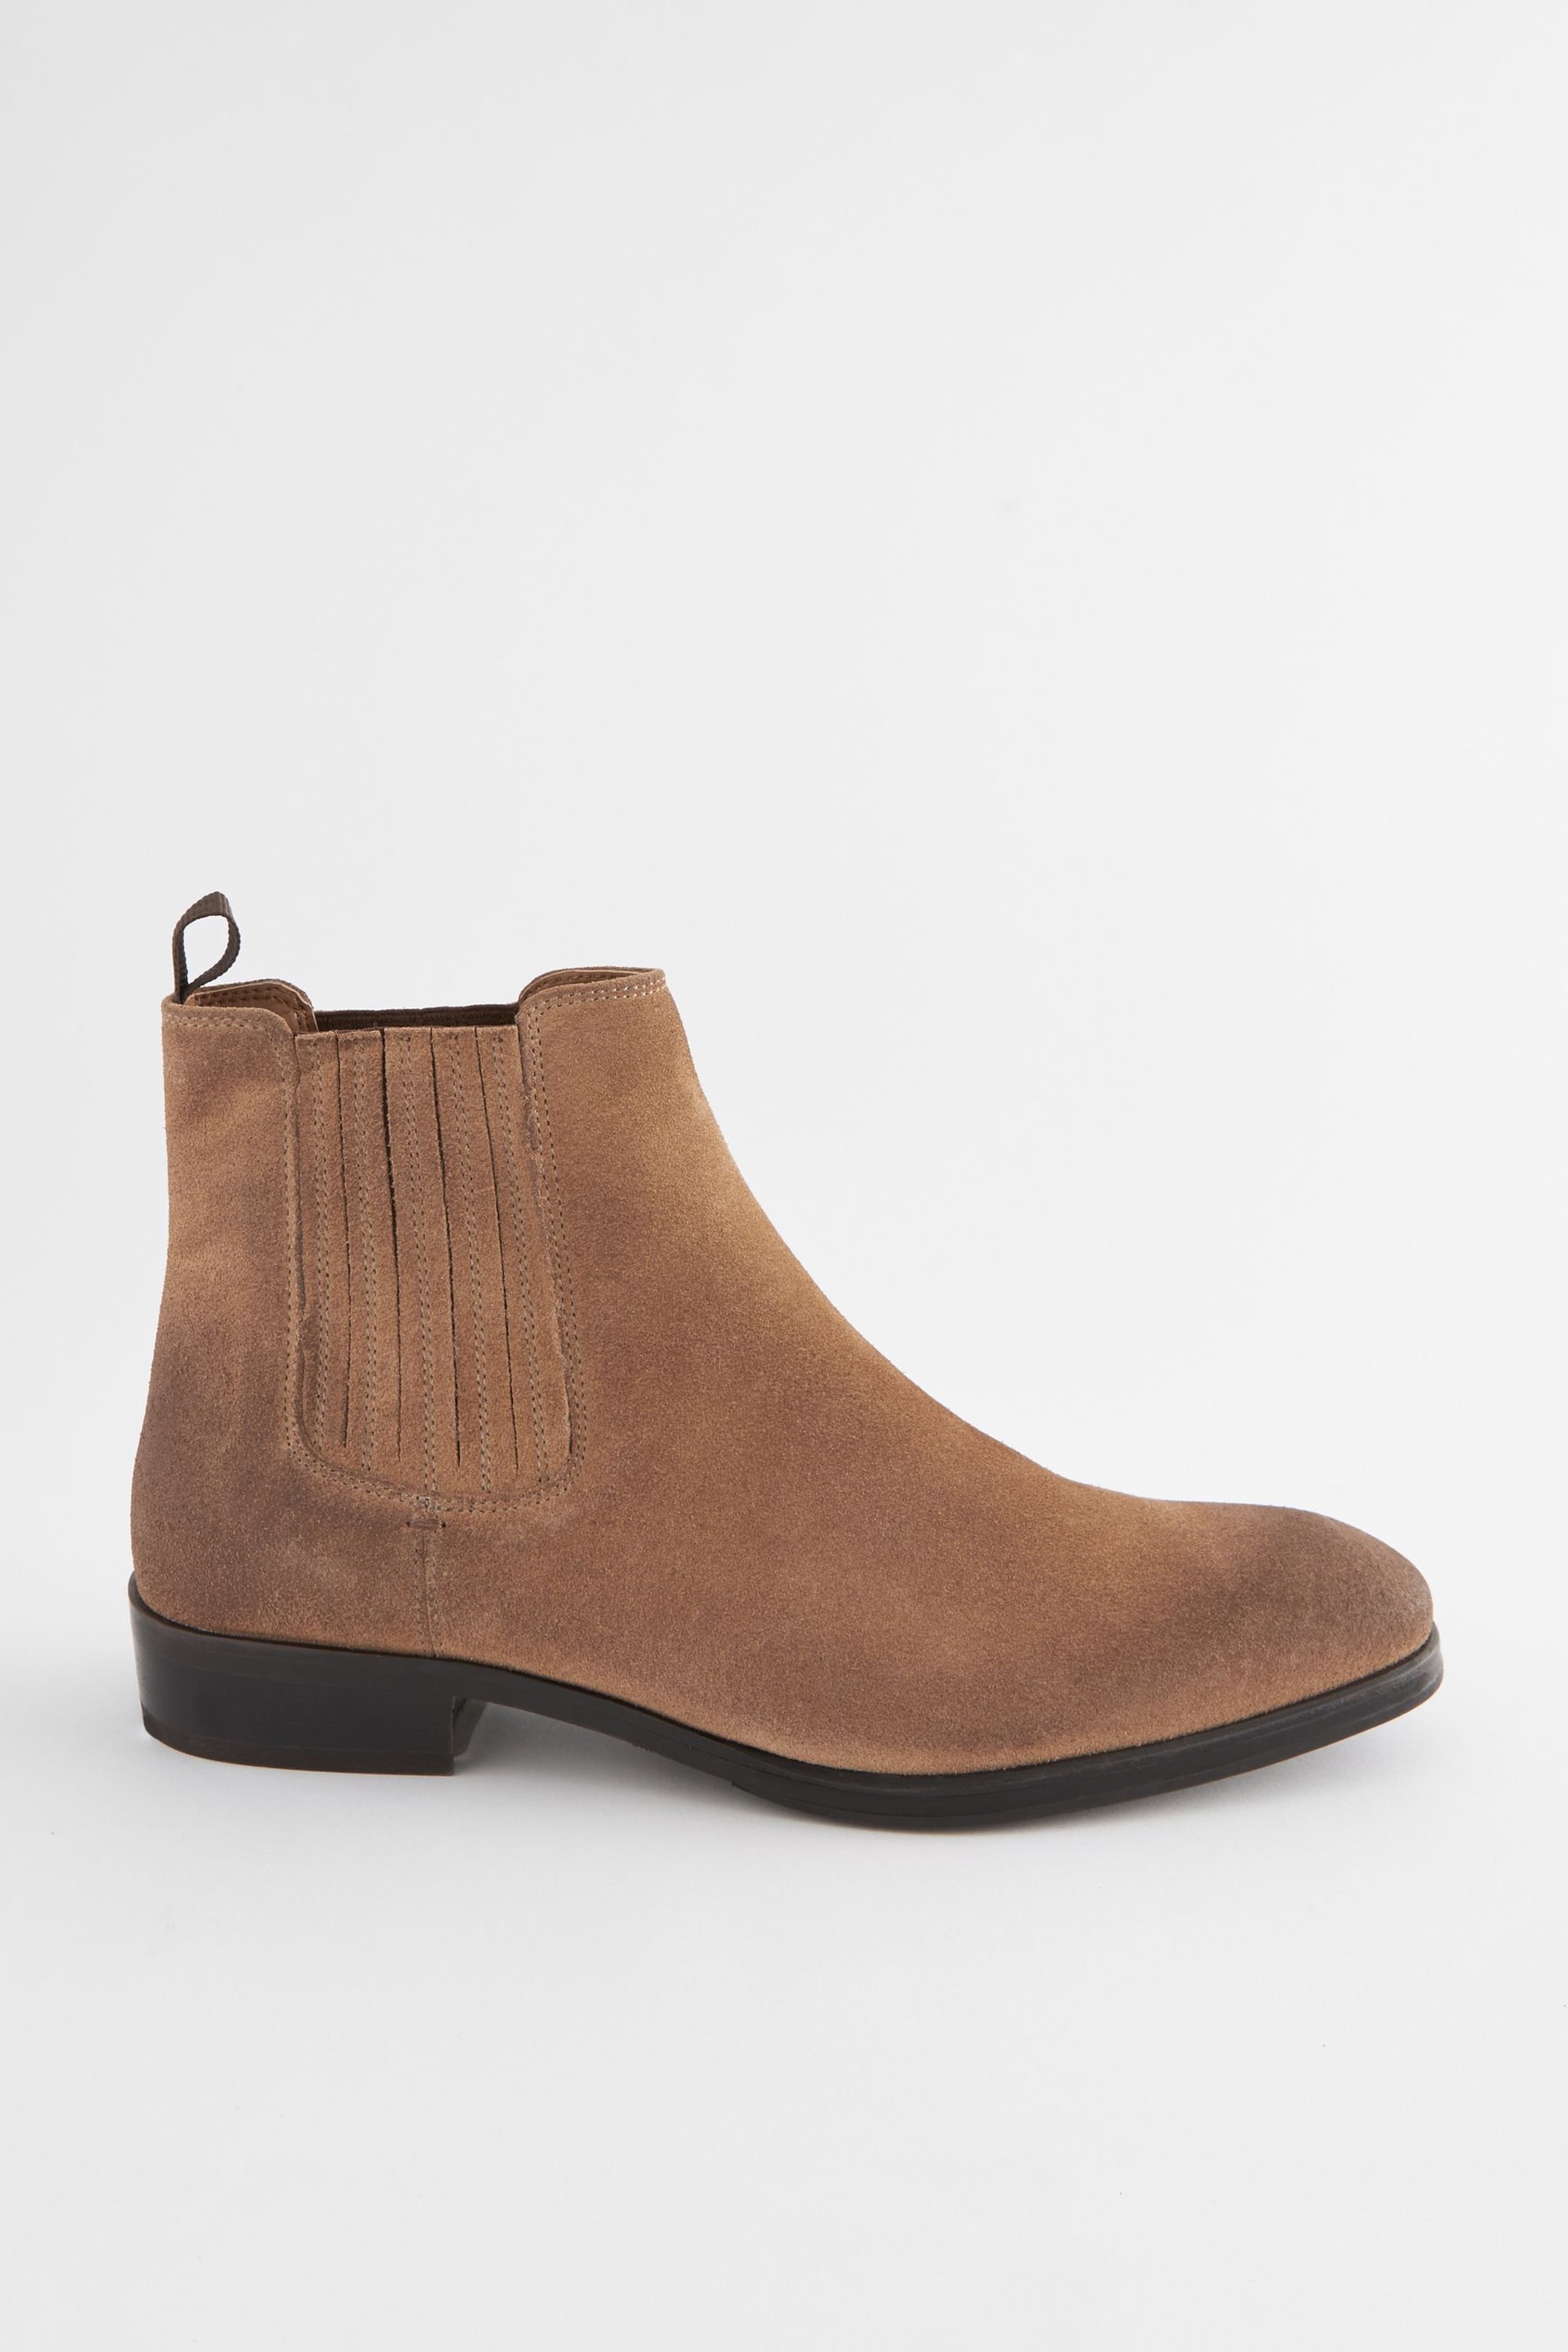 Brown Suede Chelsea Boots - Image 2 of 7